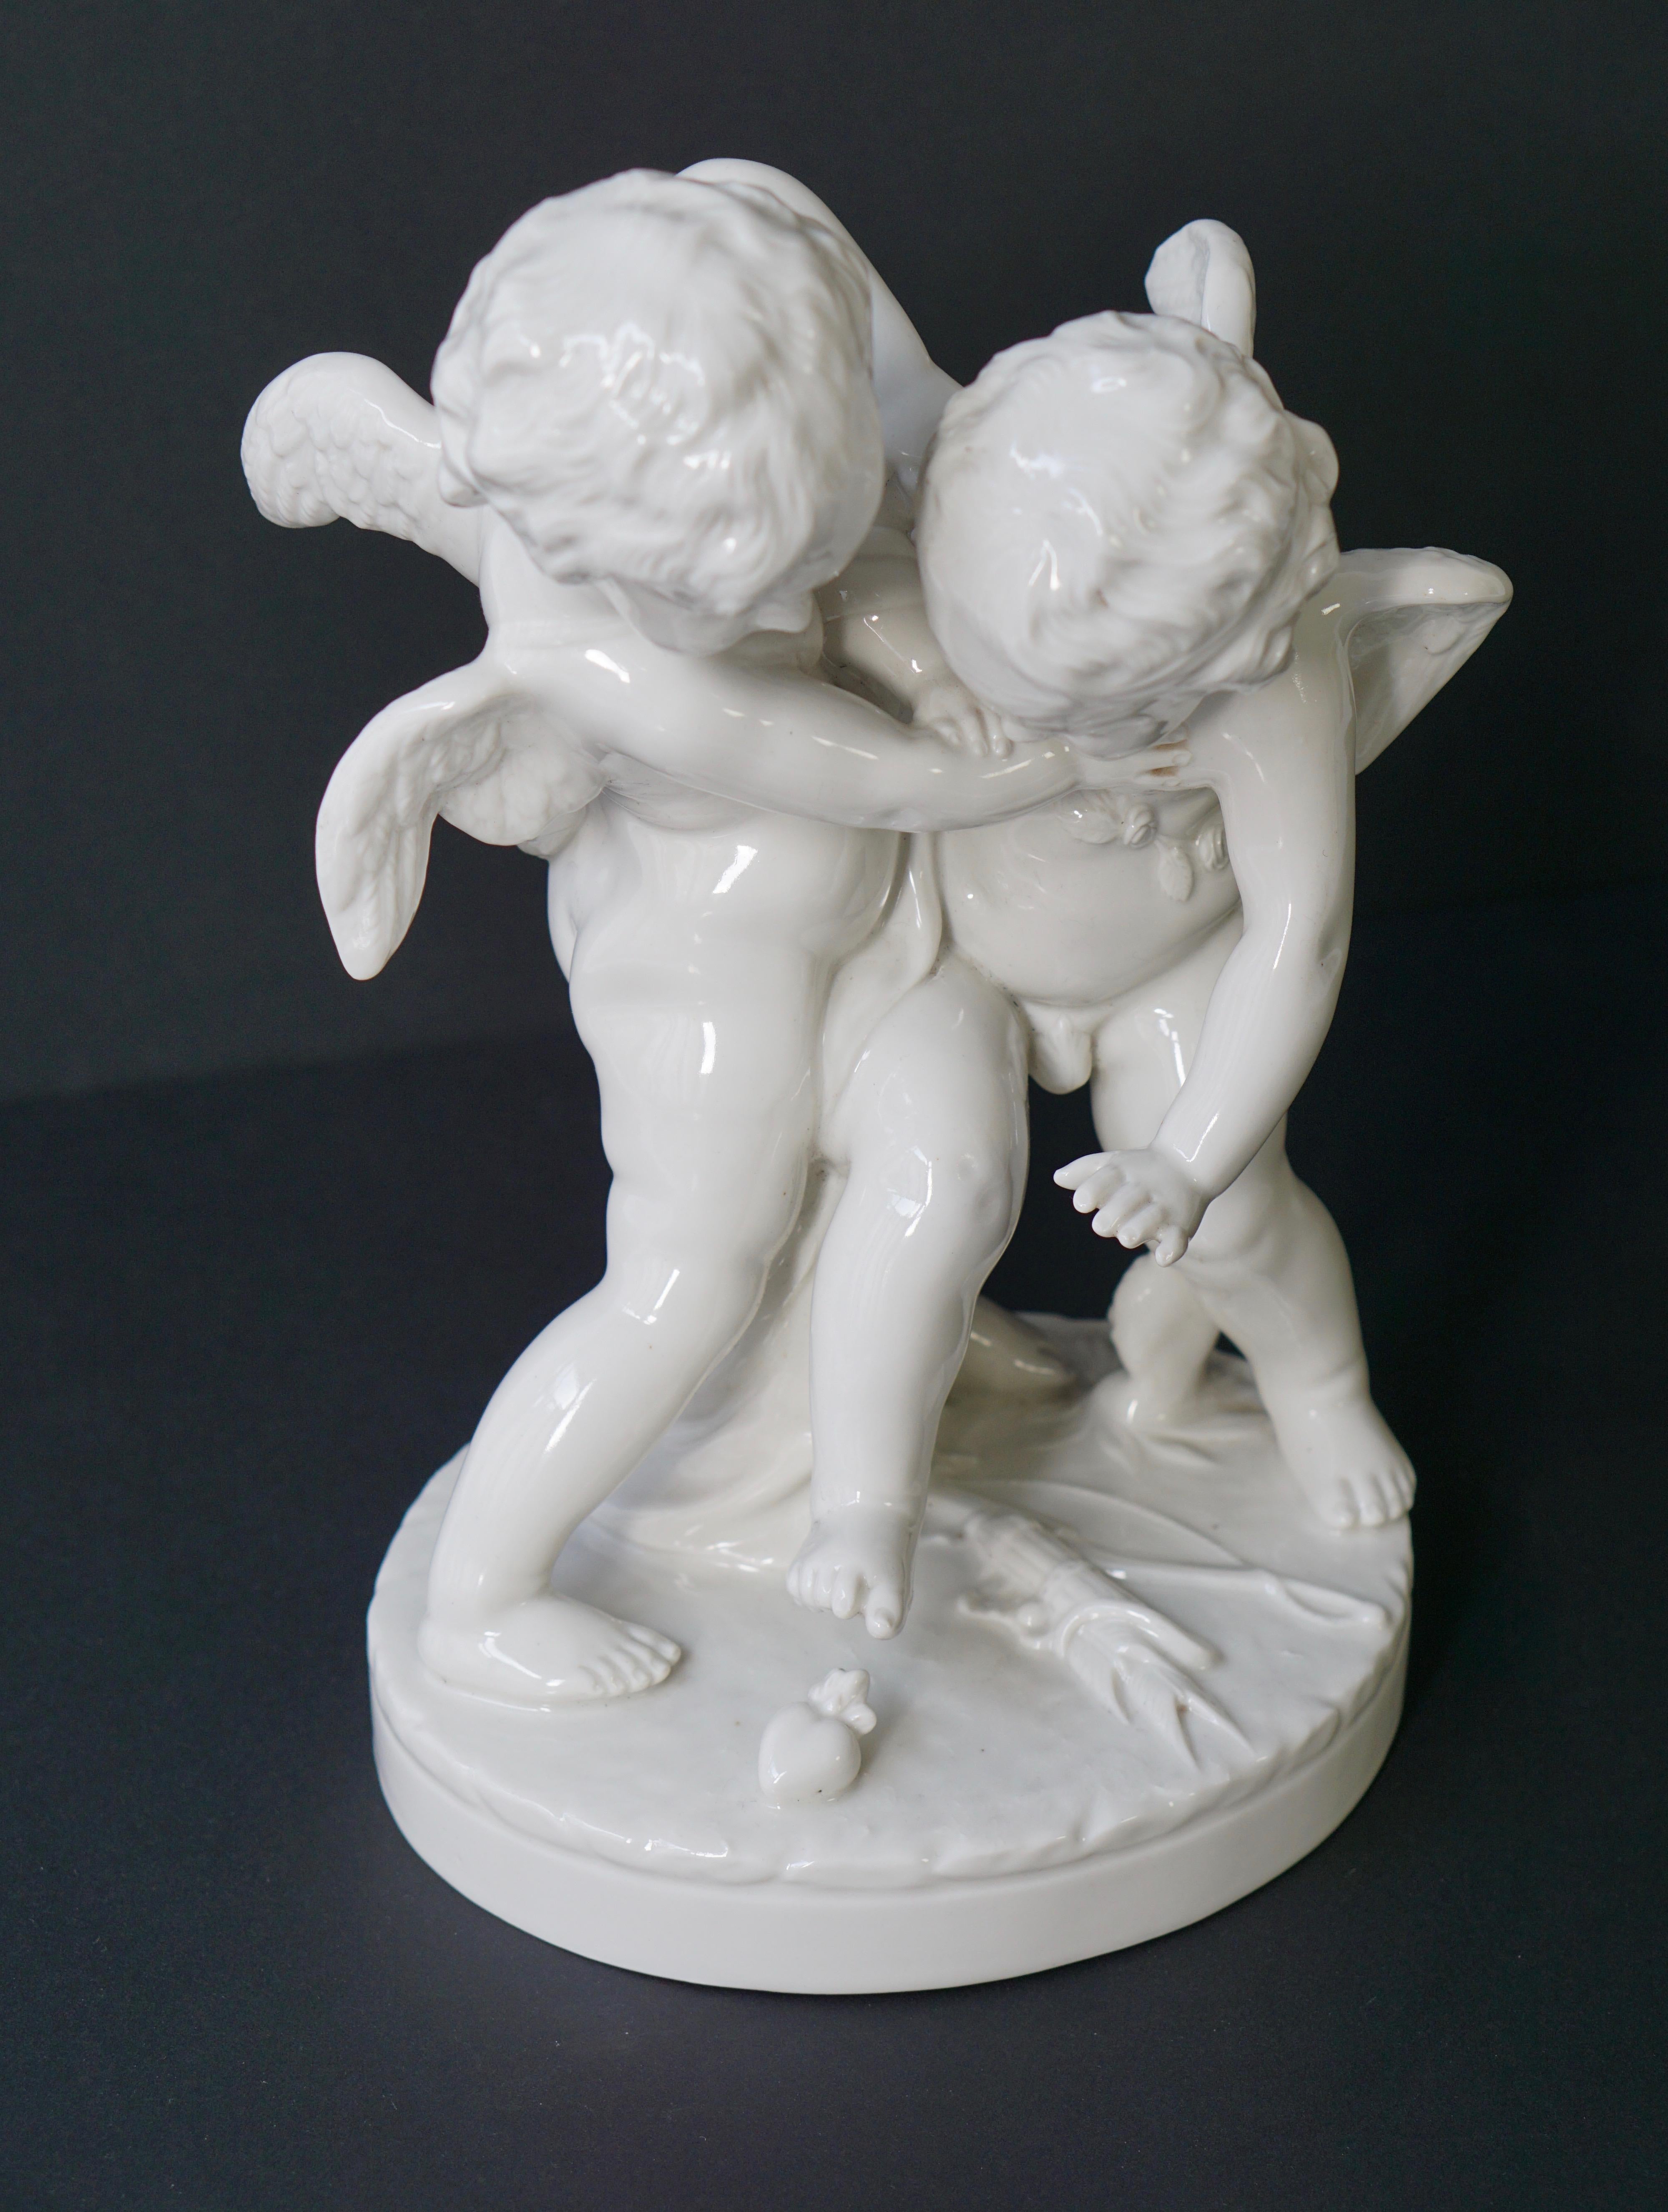  Porcelain Figurative Sculpture Representing Two Little Angels, Putti For Sale 6